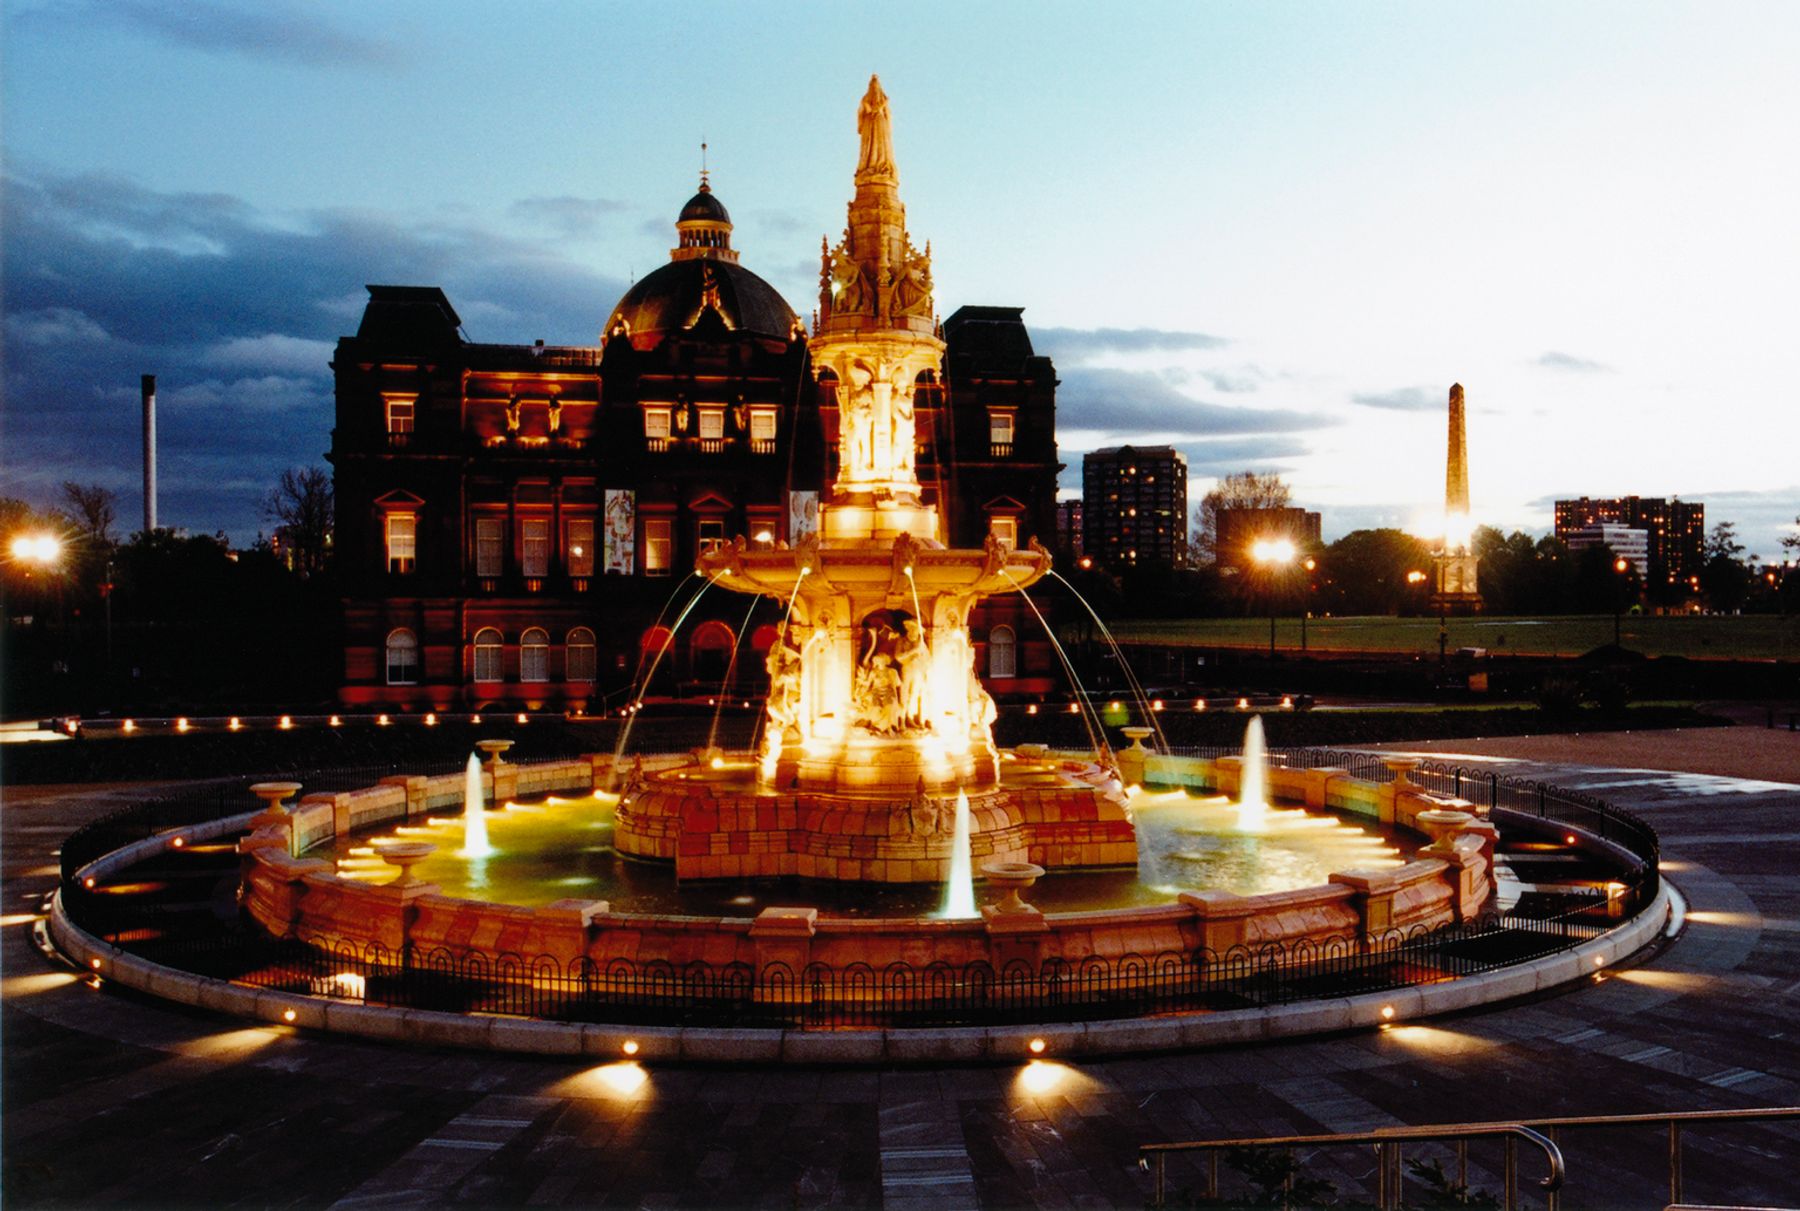 Doulton Fountain, Glasgow. Architecture and lighting design: Glasgow City Council Building Services